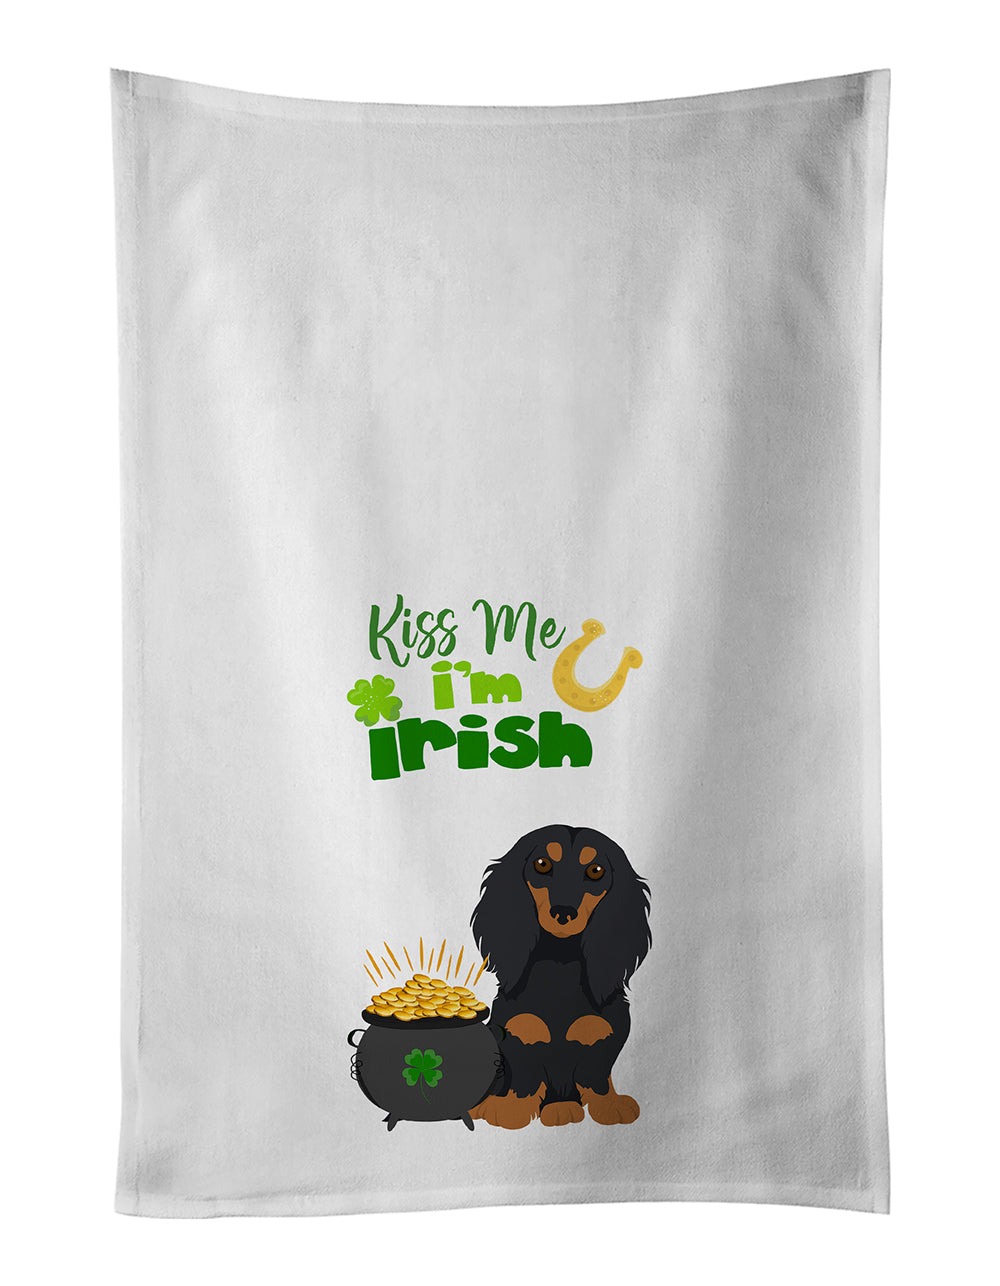 Buy this Longhair Black and Tan Dachshund St. Patrick's Day White Kitchen Towel Set of 2 Dish Towels